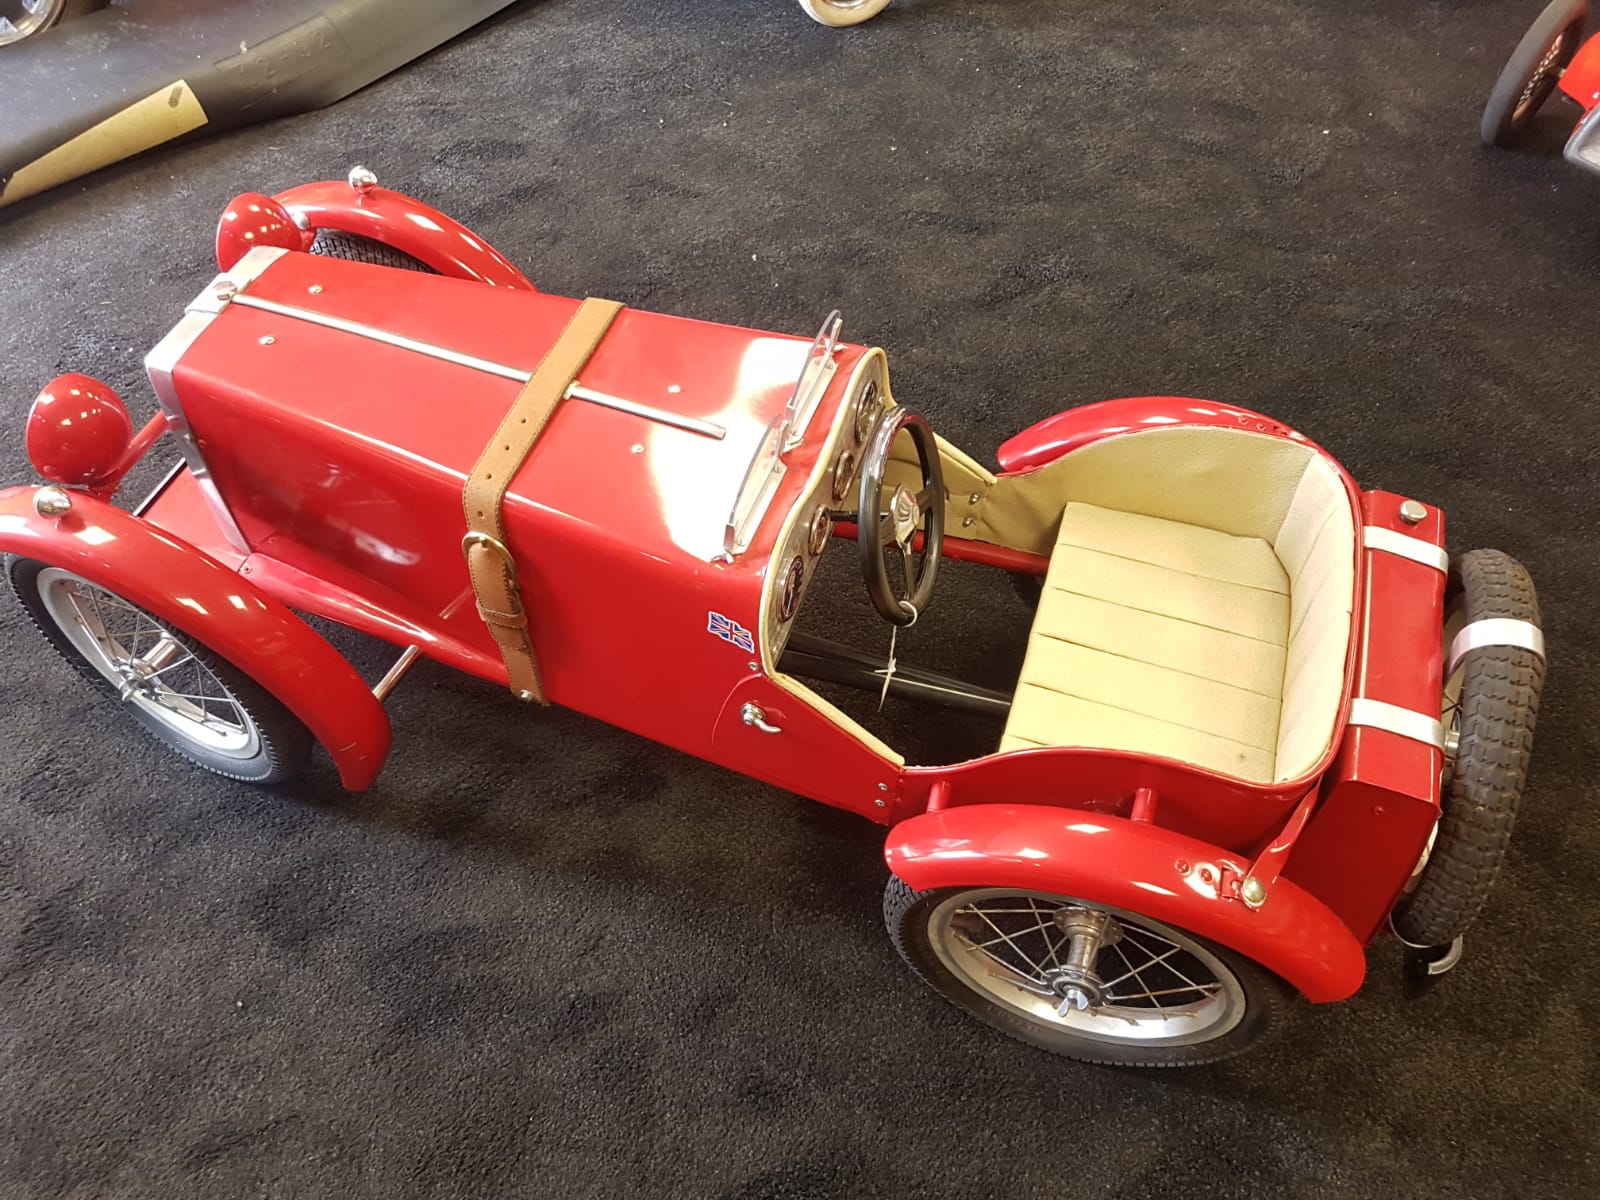 An MG, T C Pedal Car C1970s having highly detailed metal body. Measuring 115cm in length. - Image 2 of 3